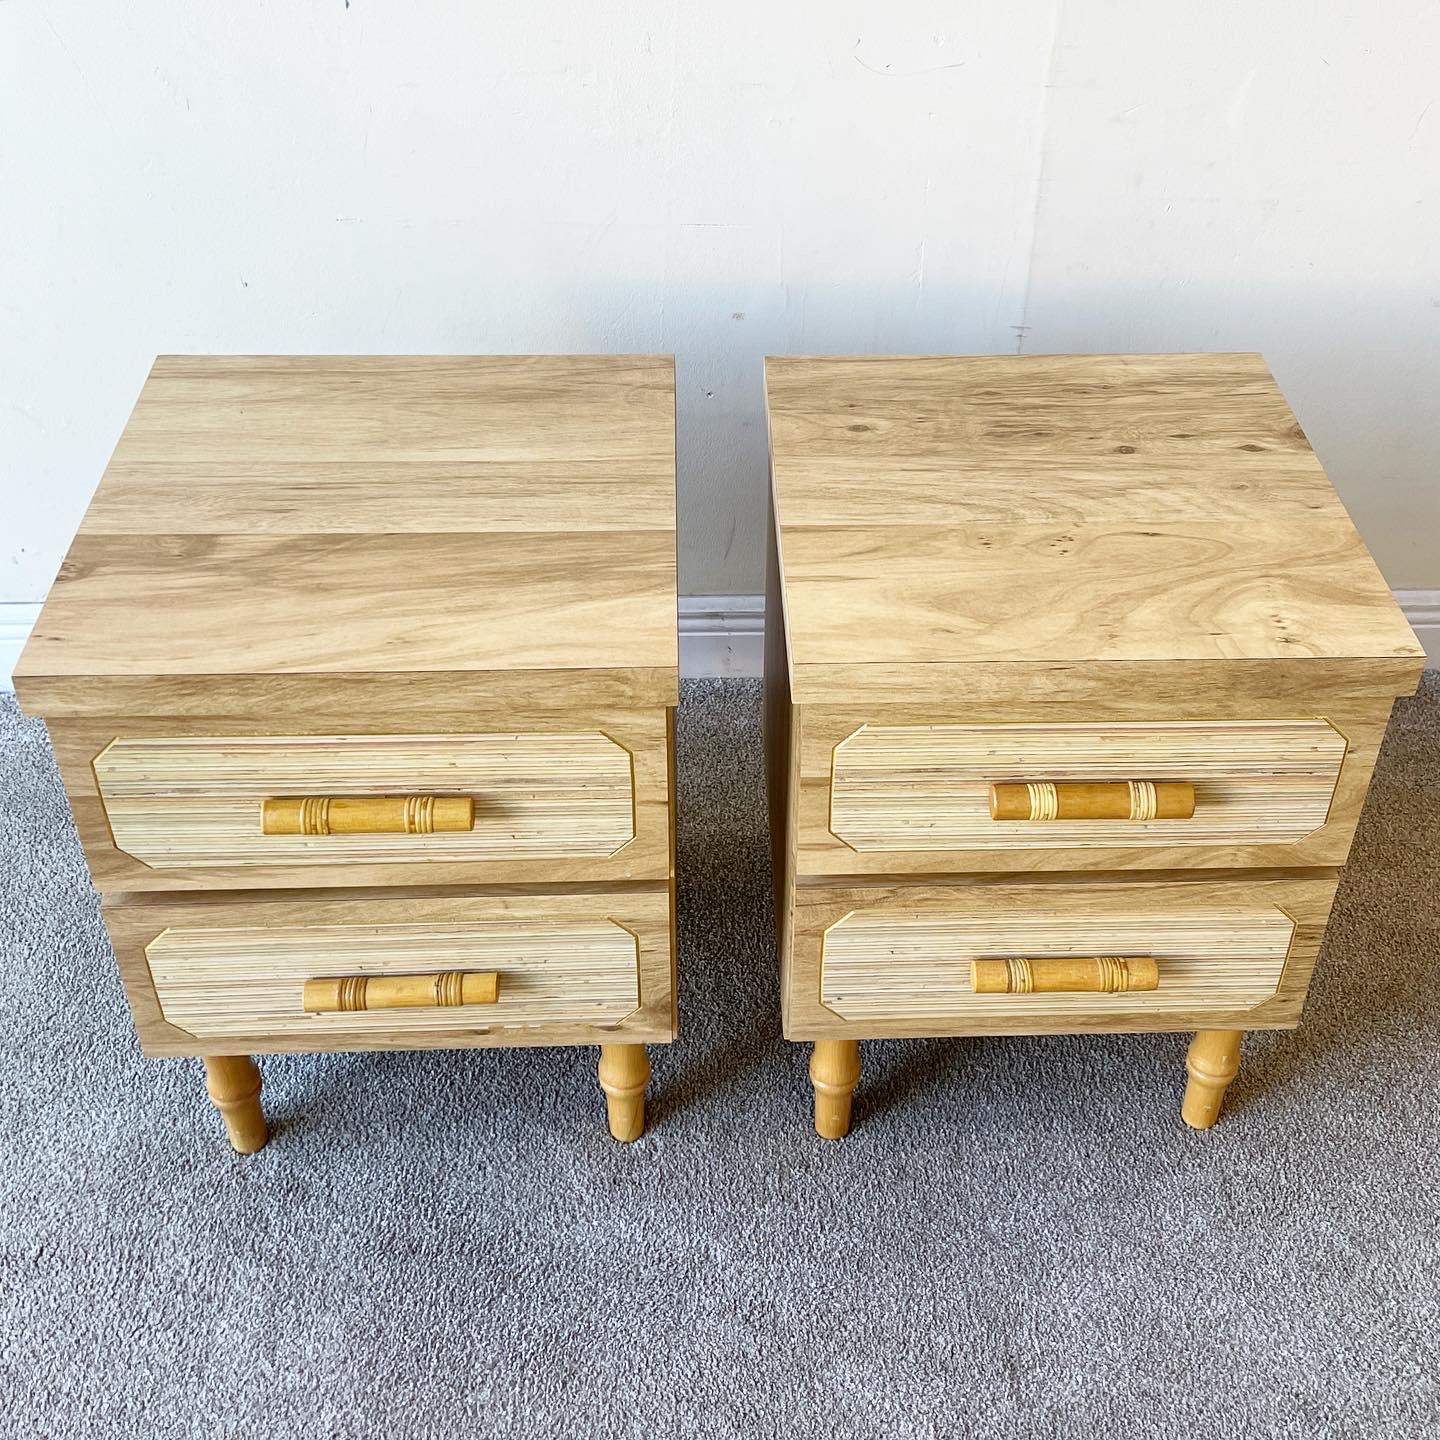 Amazing pair of woodgrain laminate Nighstands. A marriage of postmodern and boho style. Features faux bamboo handles and legs. These were made in Lantana, Florida.